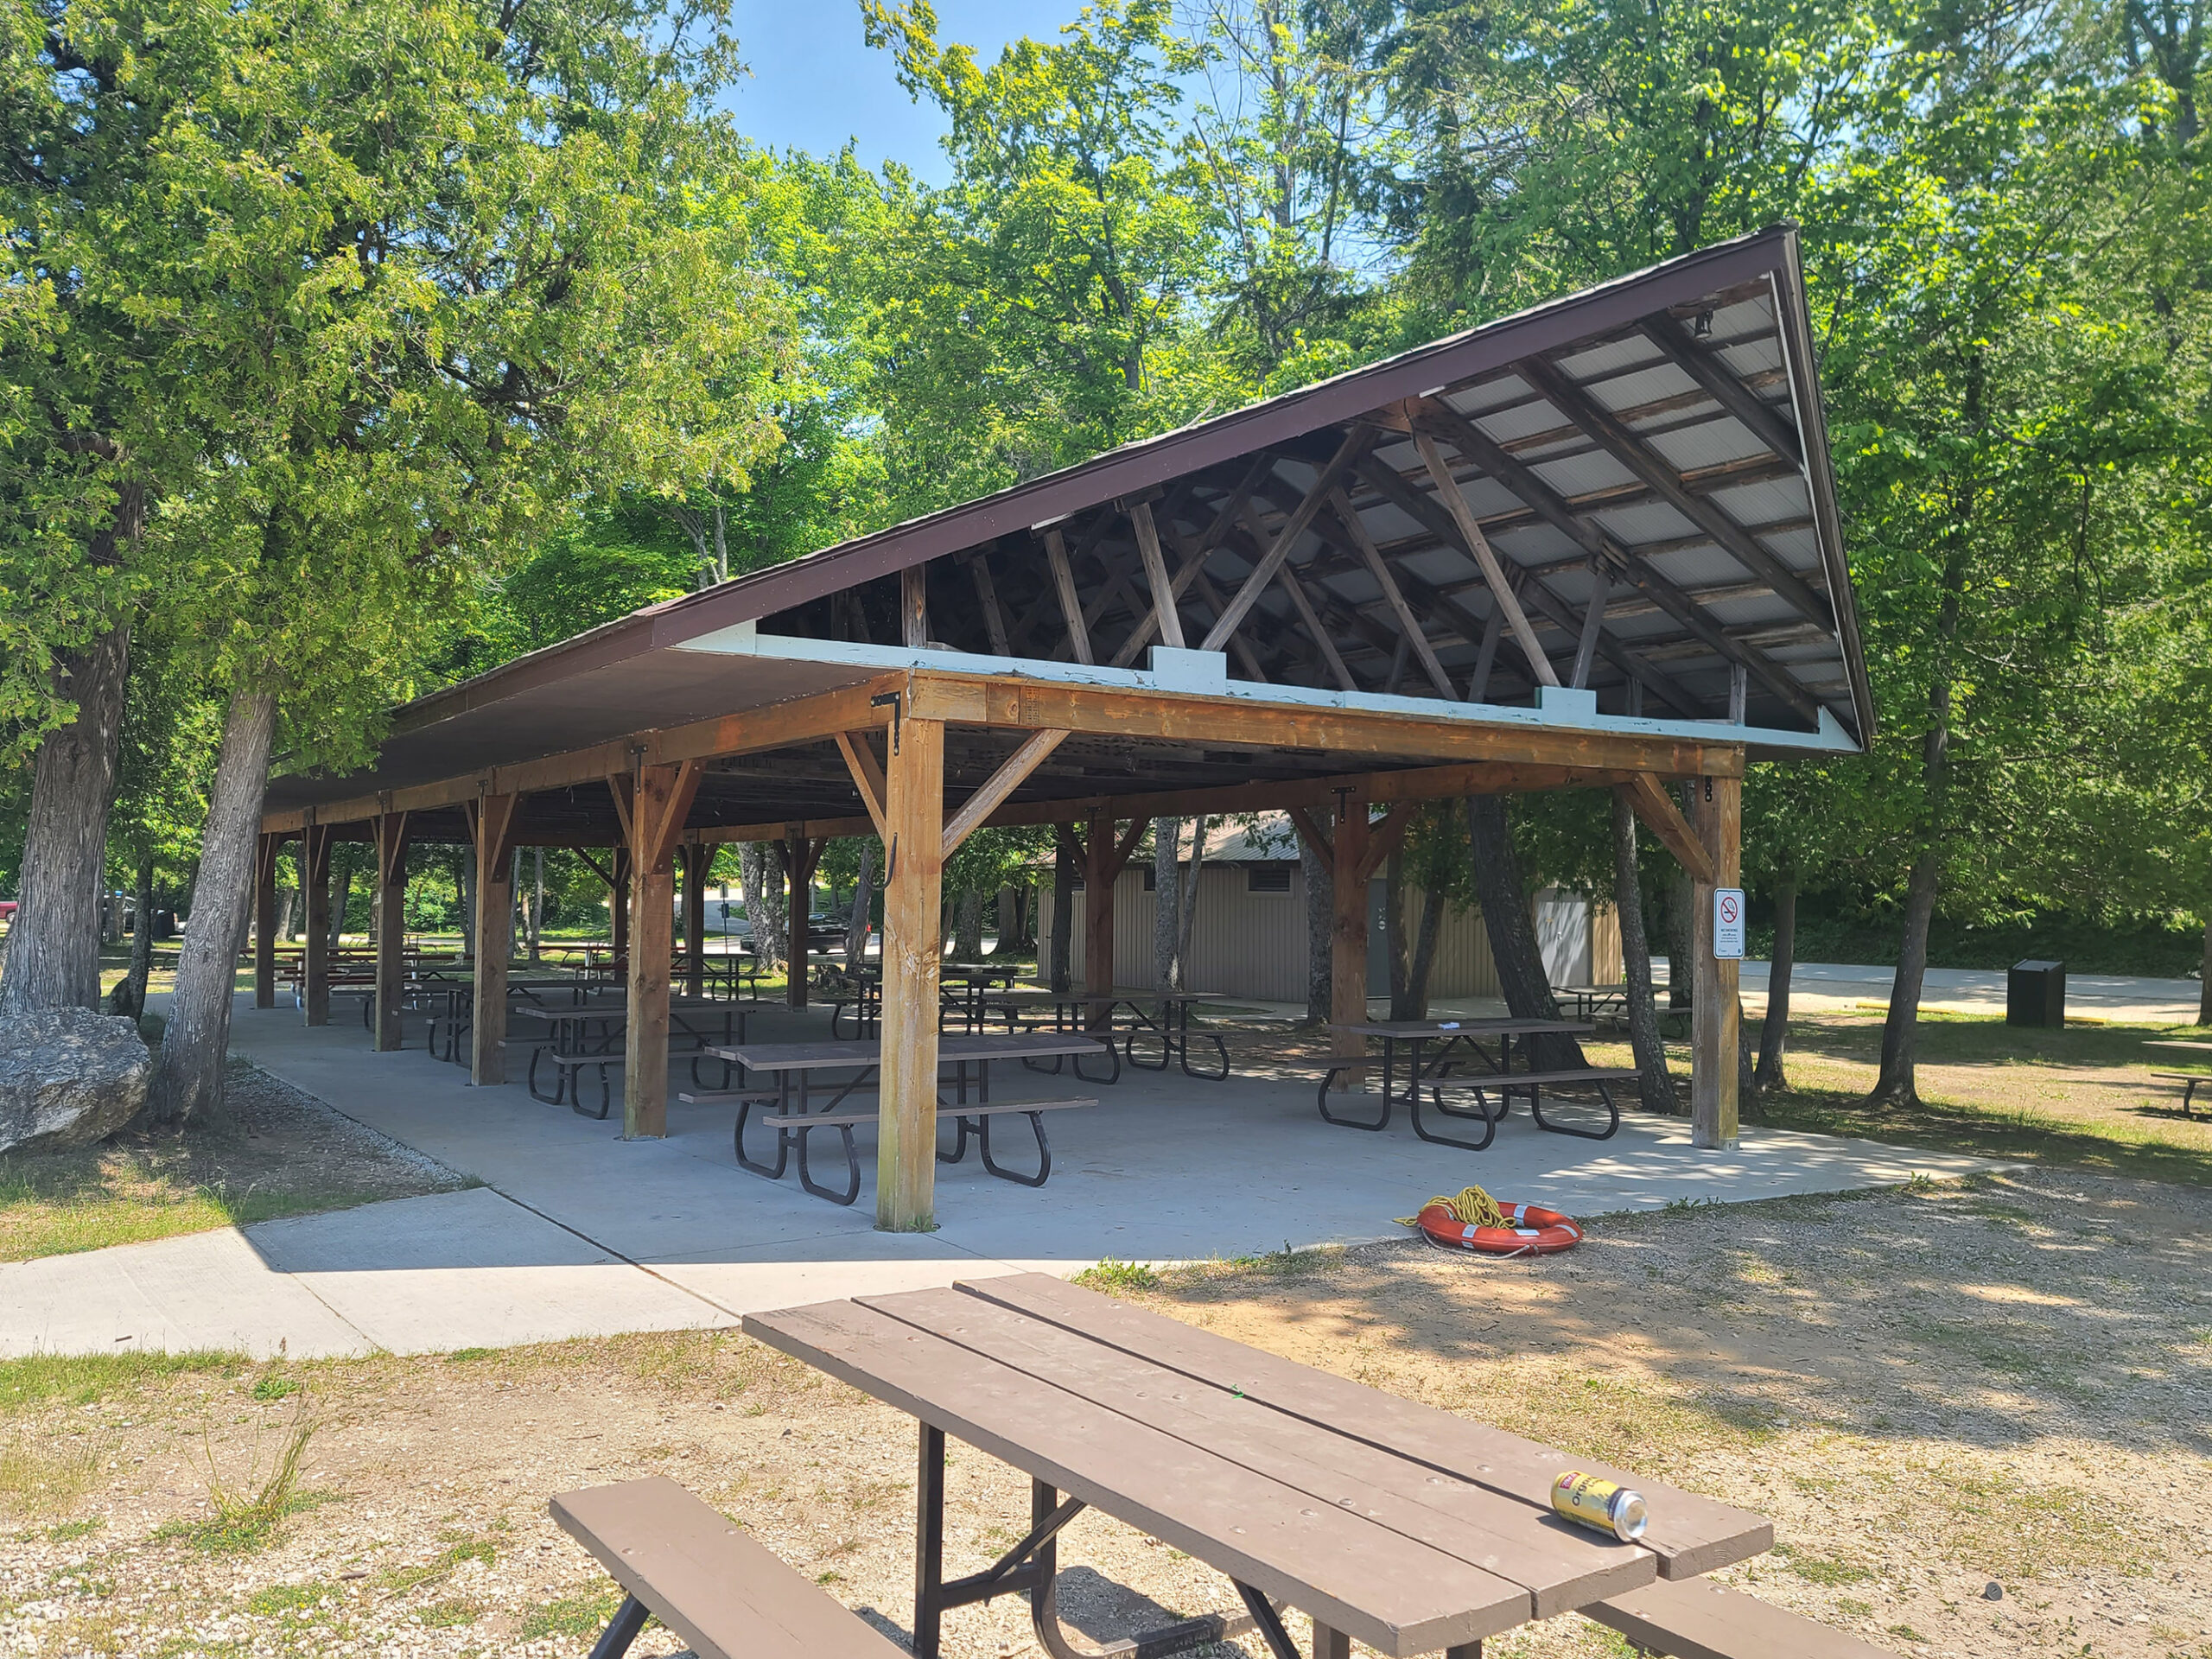 A large, open wooden pavilion structure, with picnic seating underneath.